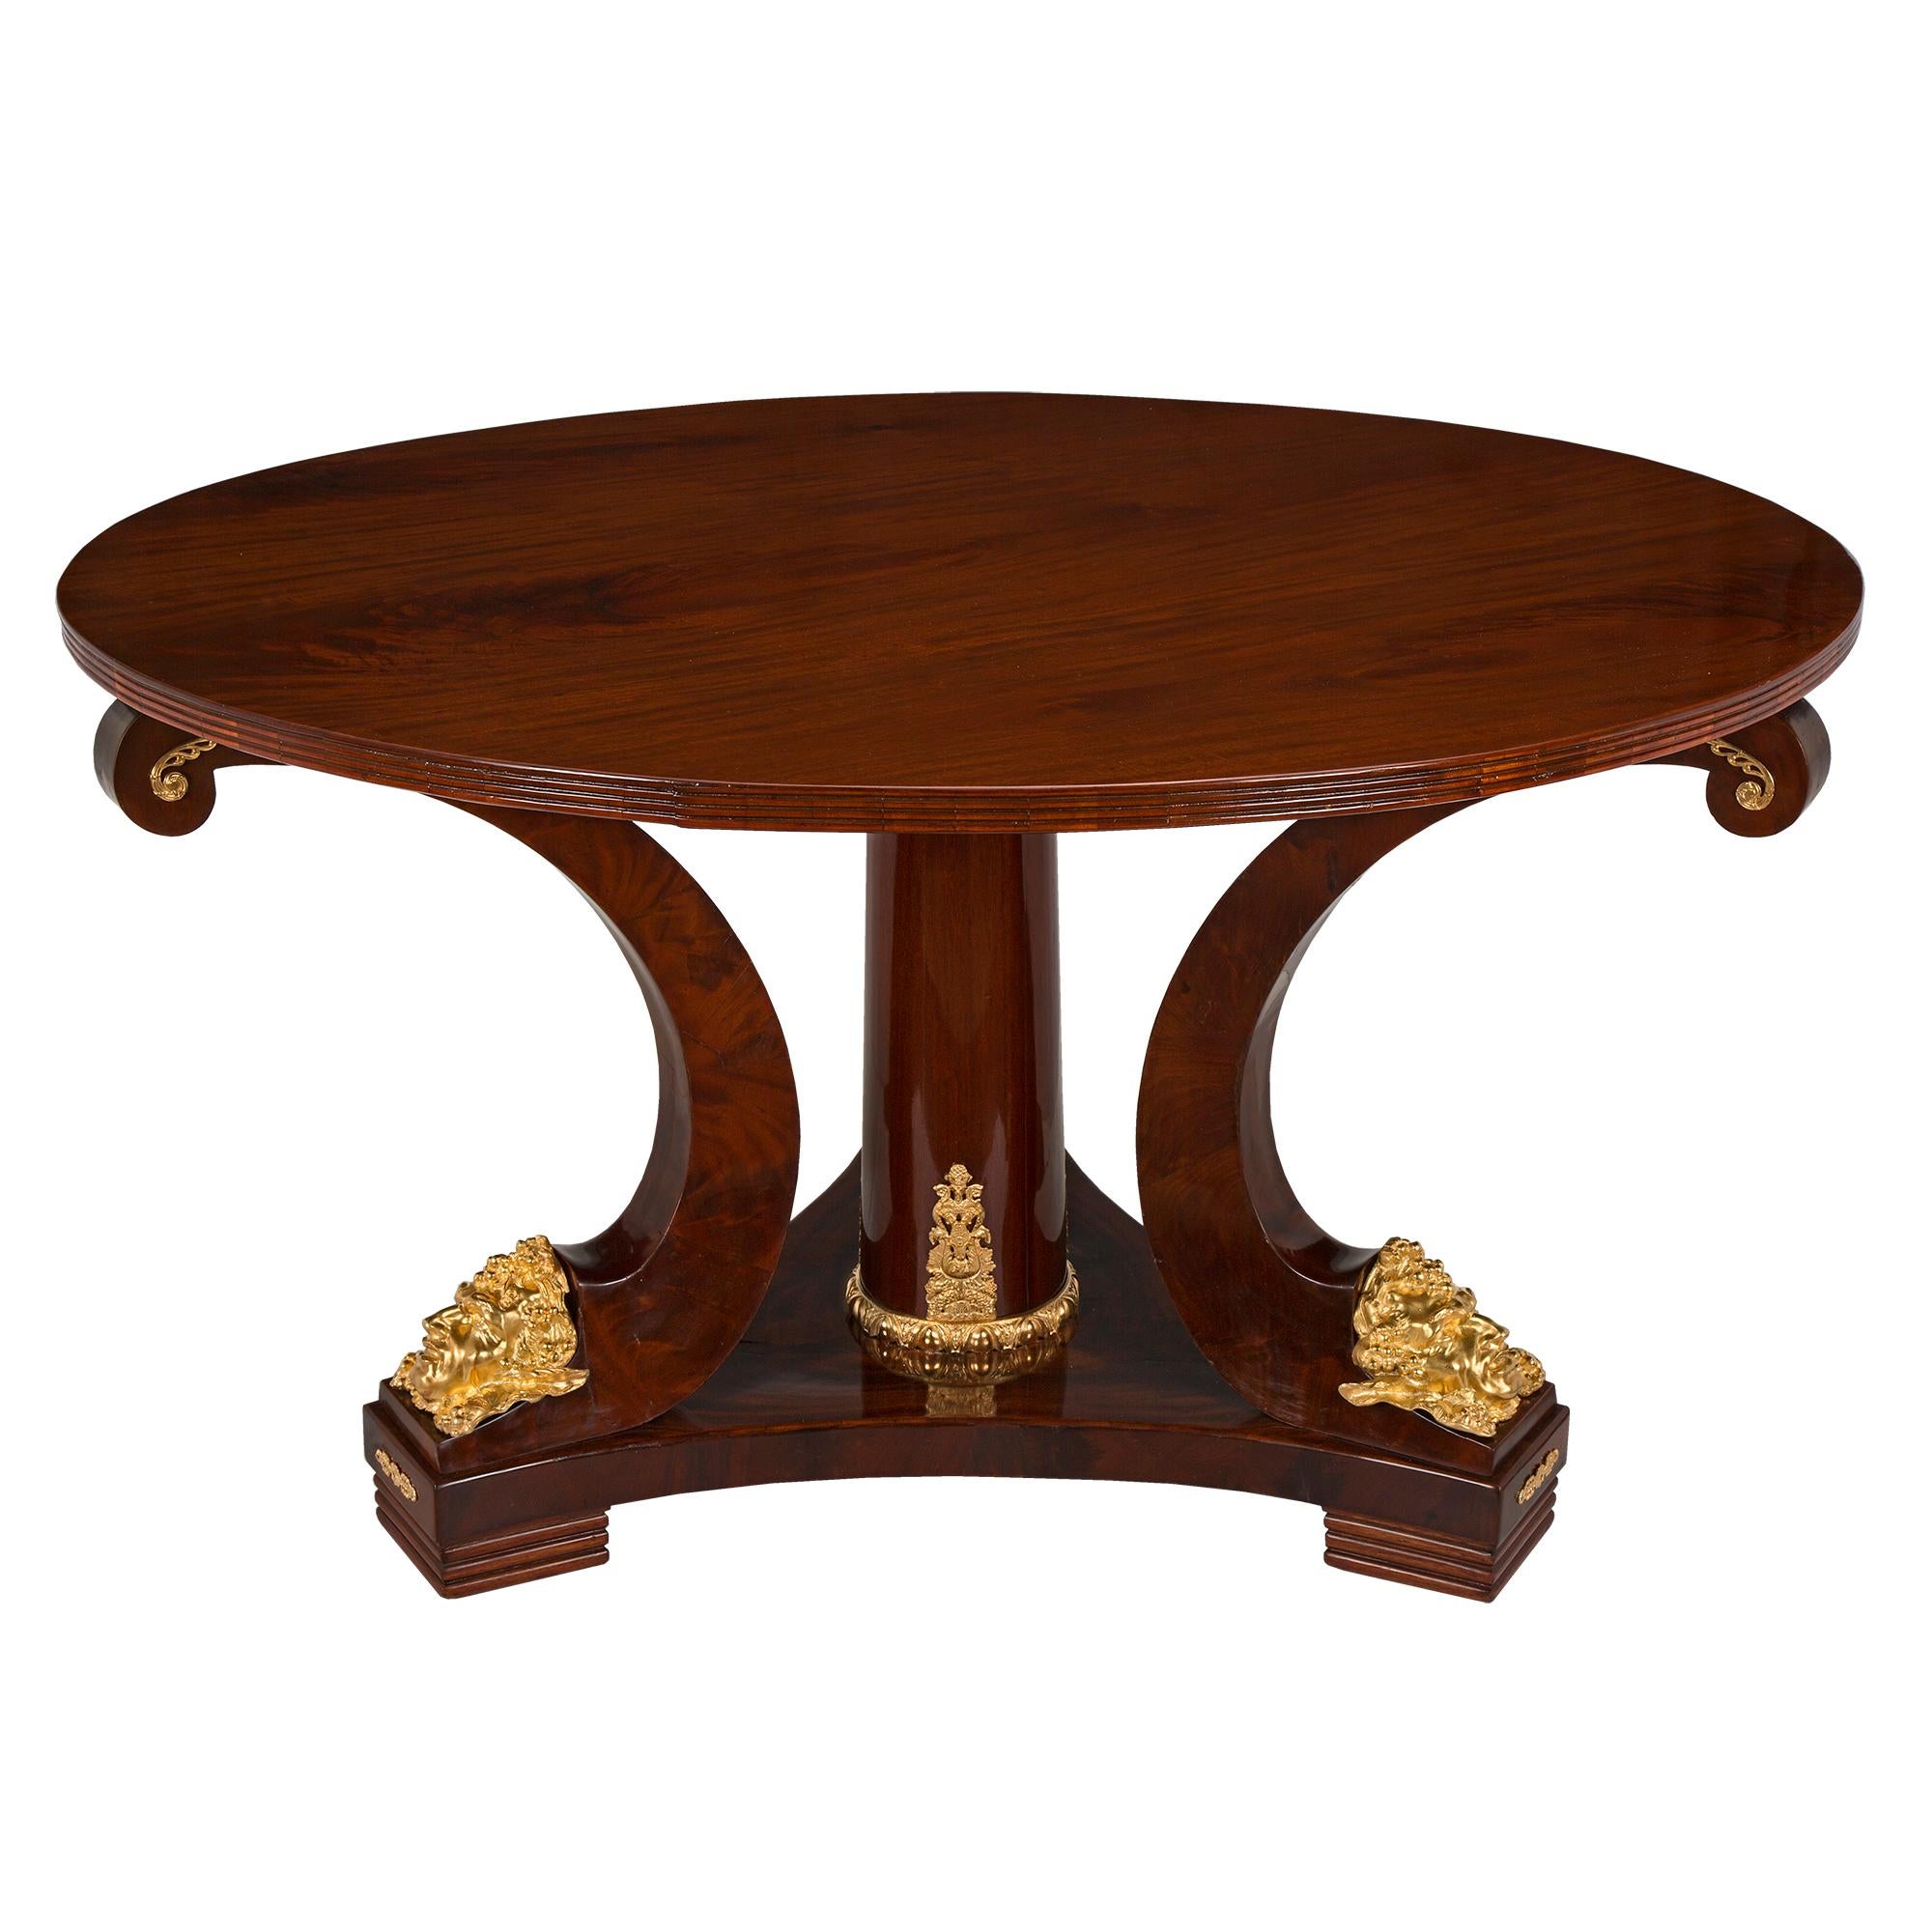 A very handsome French 19th century neo-classical st. flamed mahogany and ormolu center table. The table is raised on a triangular base with concave sides and pierced ormolu mounts on the façade of each foot. Above are three elegant C scrolled